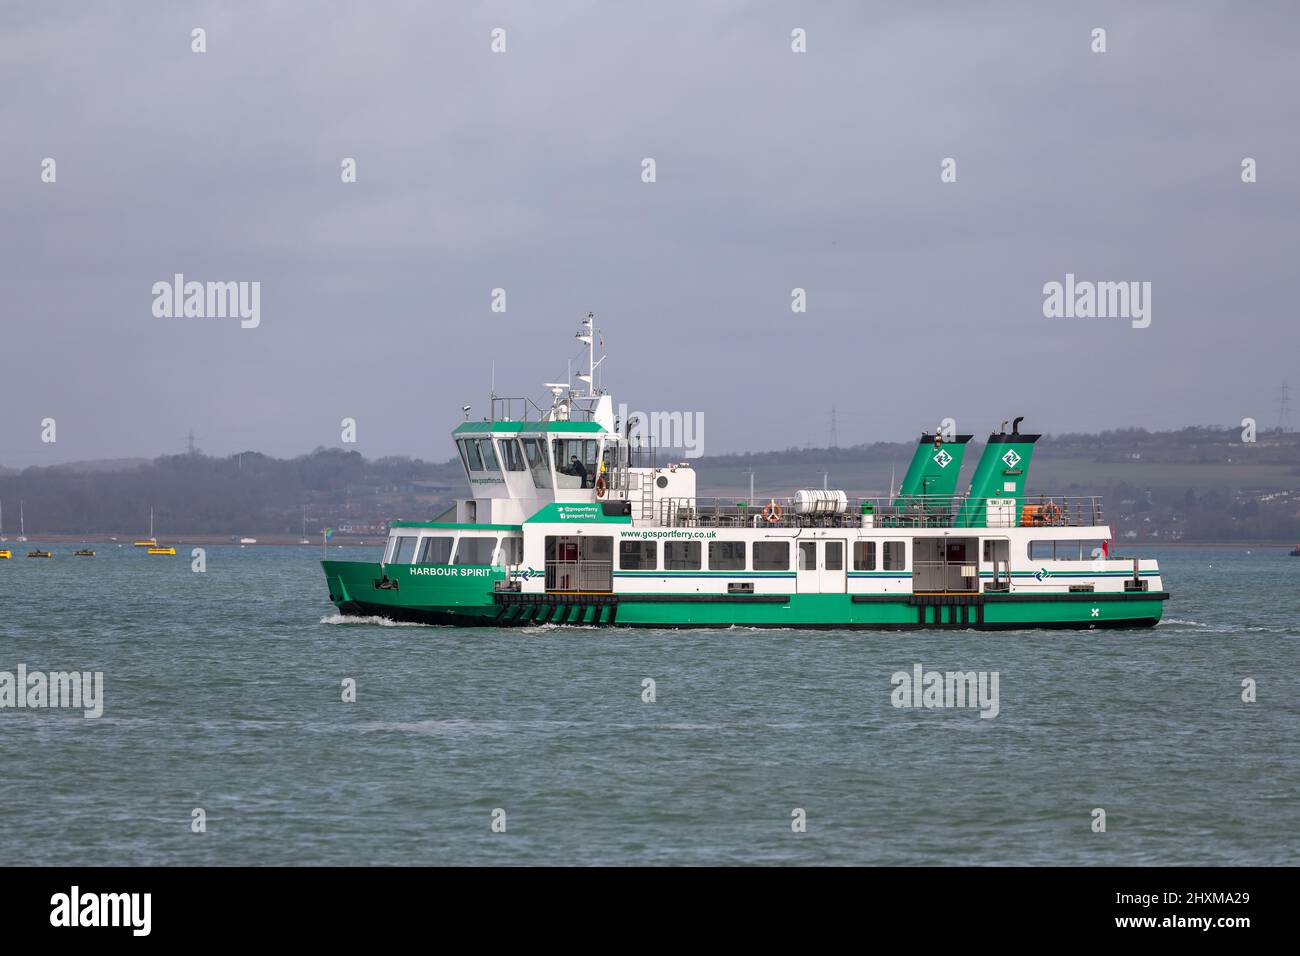 Gosport Ferry, Harbour Spirit crossing between Portsmouth and Gosport in Hampshire. Stock Photo